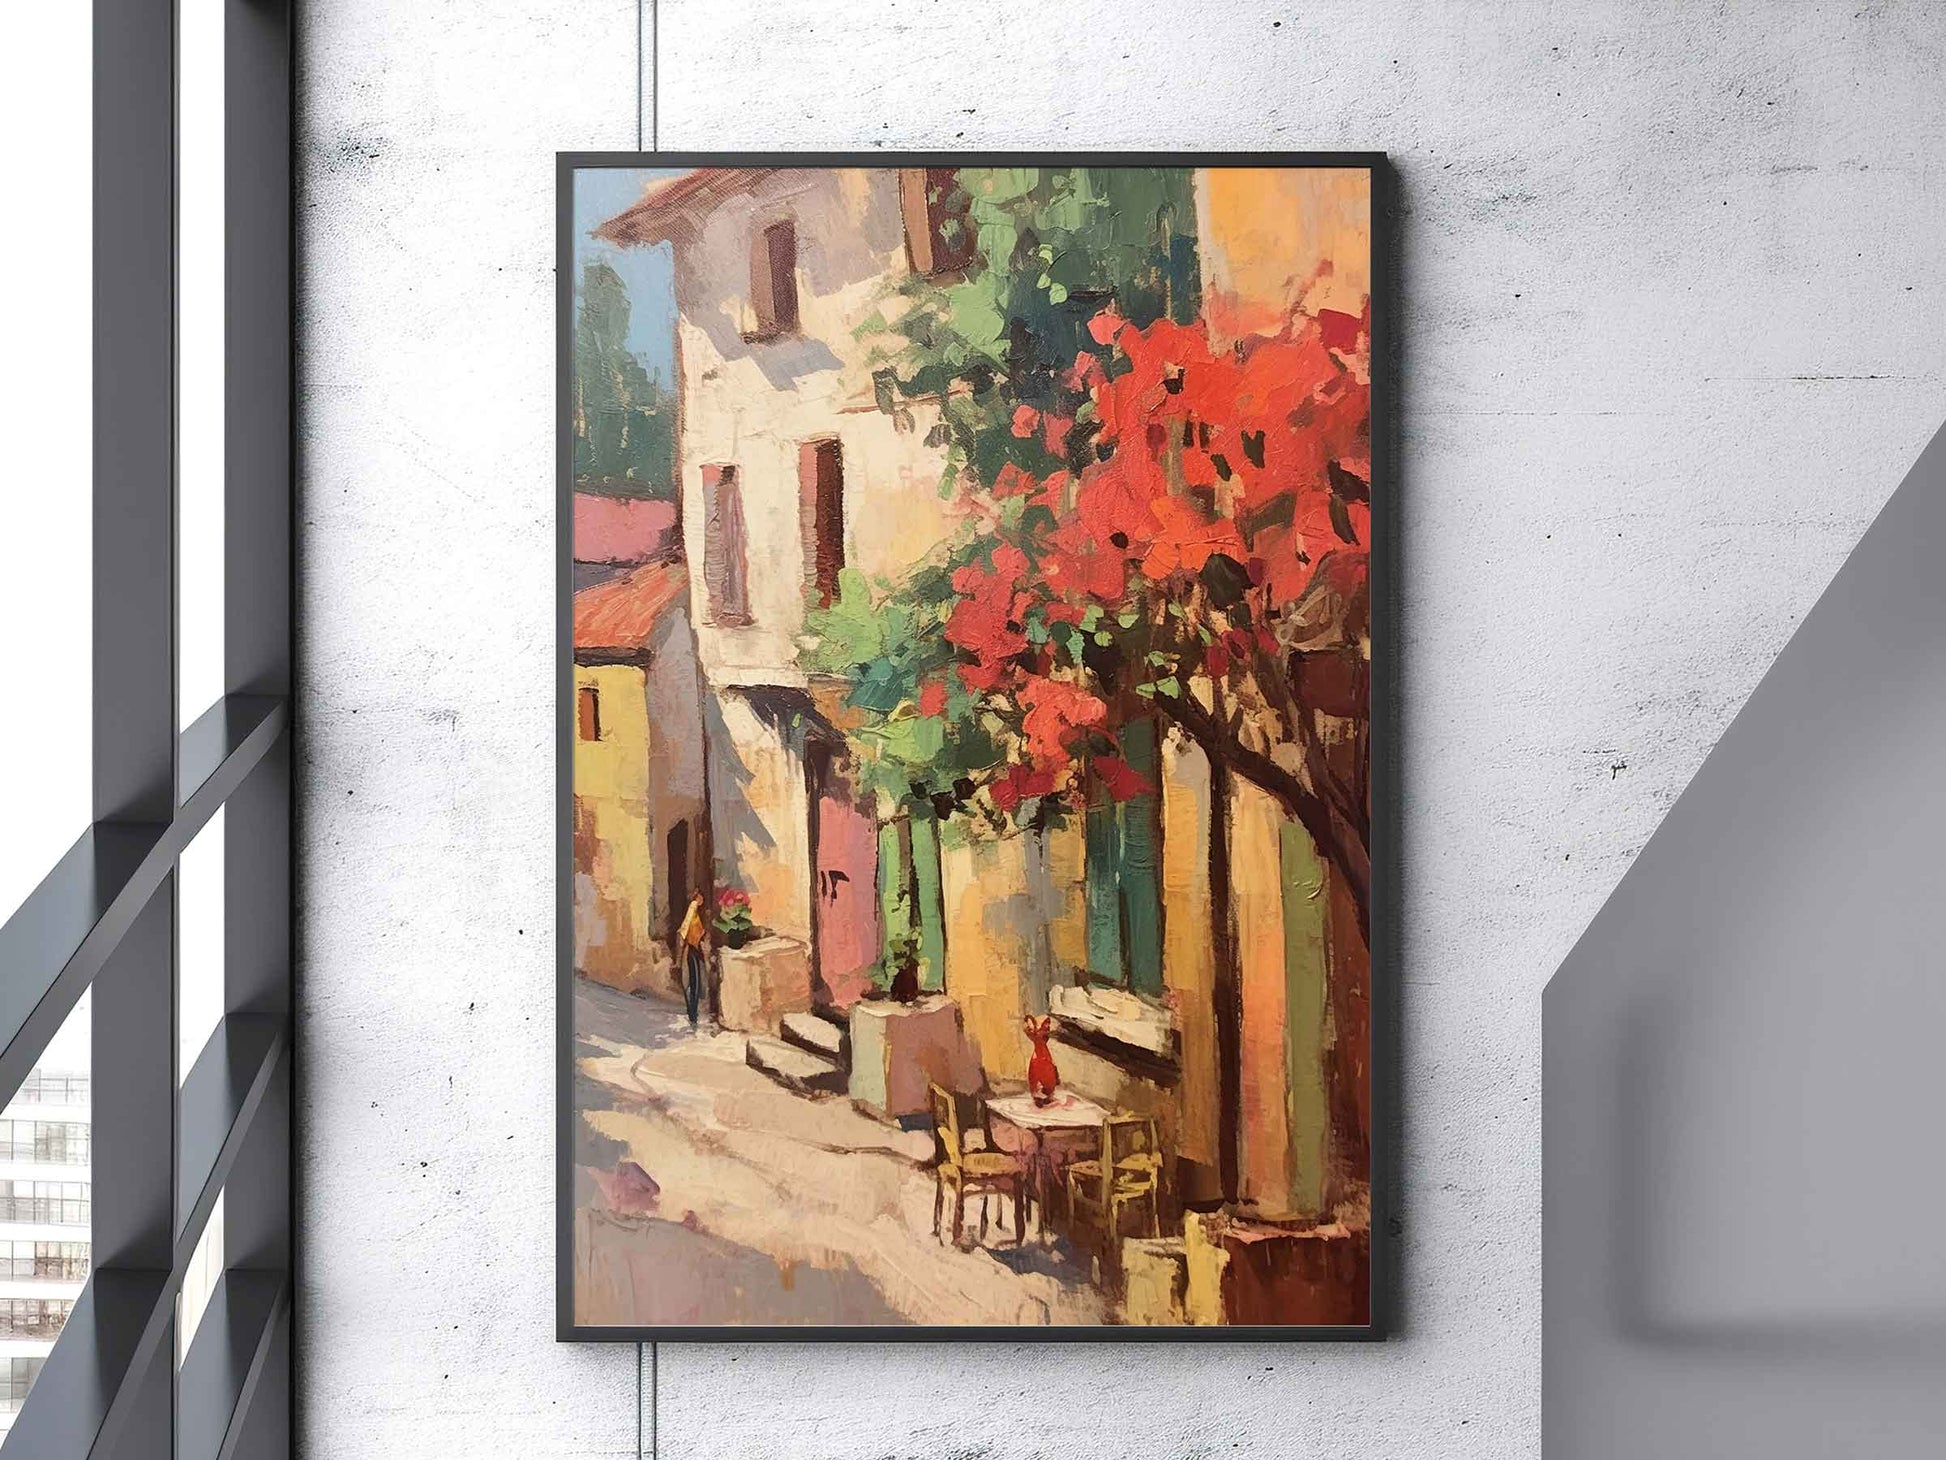 Framed Image of Italian Scenic Travel Lifestyle & Landscapes of Italy Wall Art Prints